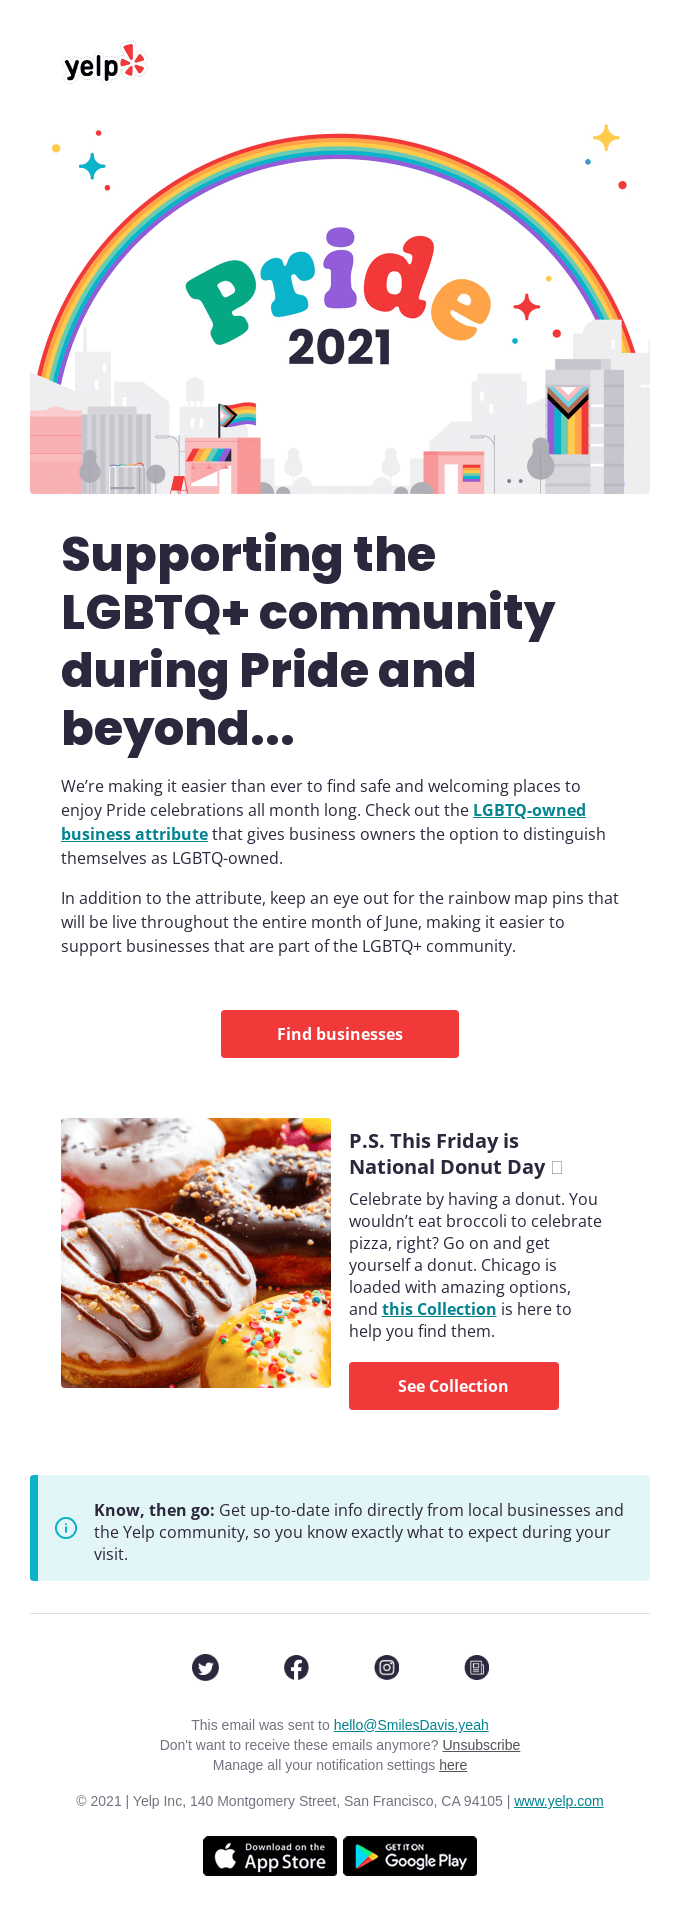 Celebrate Pride all month long 🏳️‍🌈 - Yelp Email Newslettter